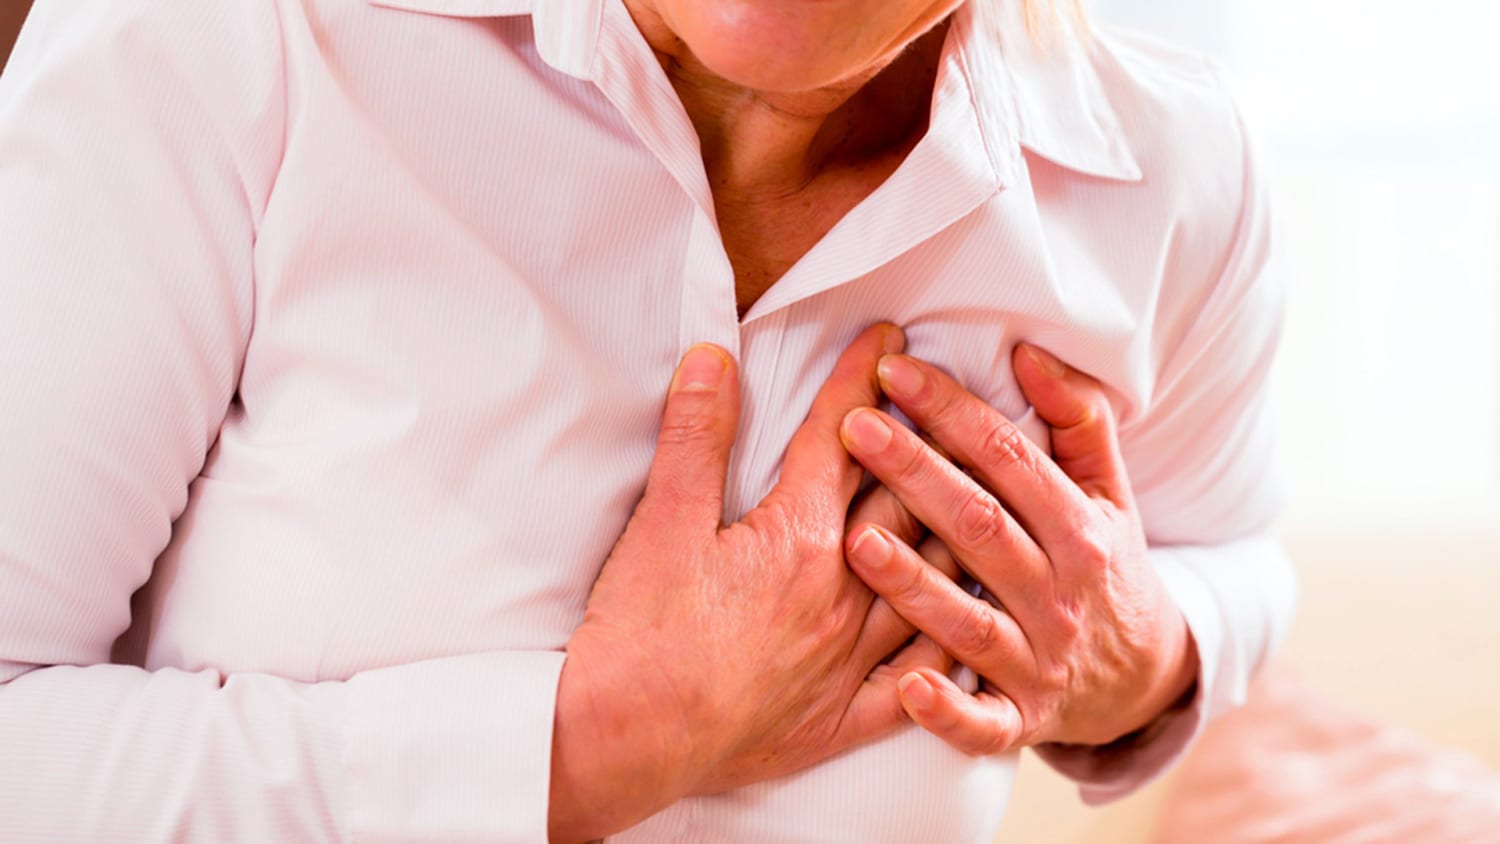 5 Heart Attack Warning Signs Never To Ignore